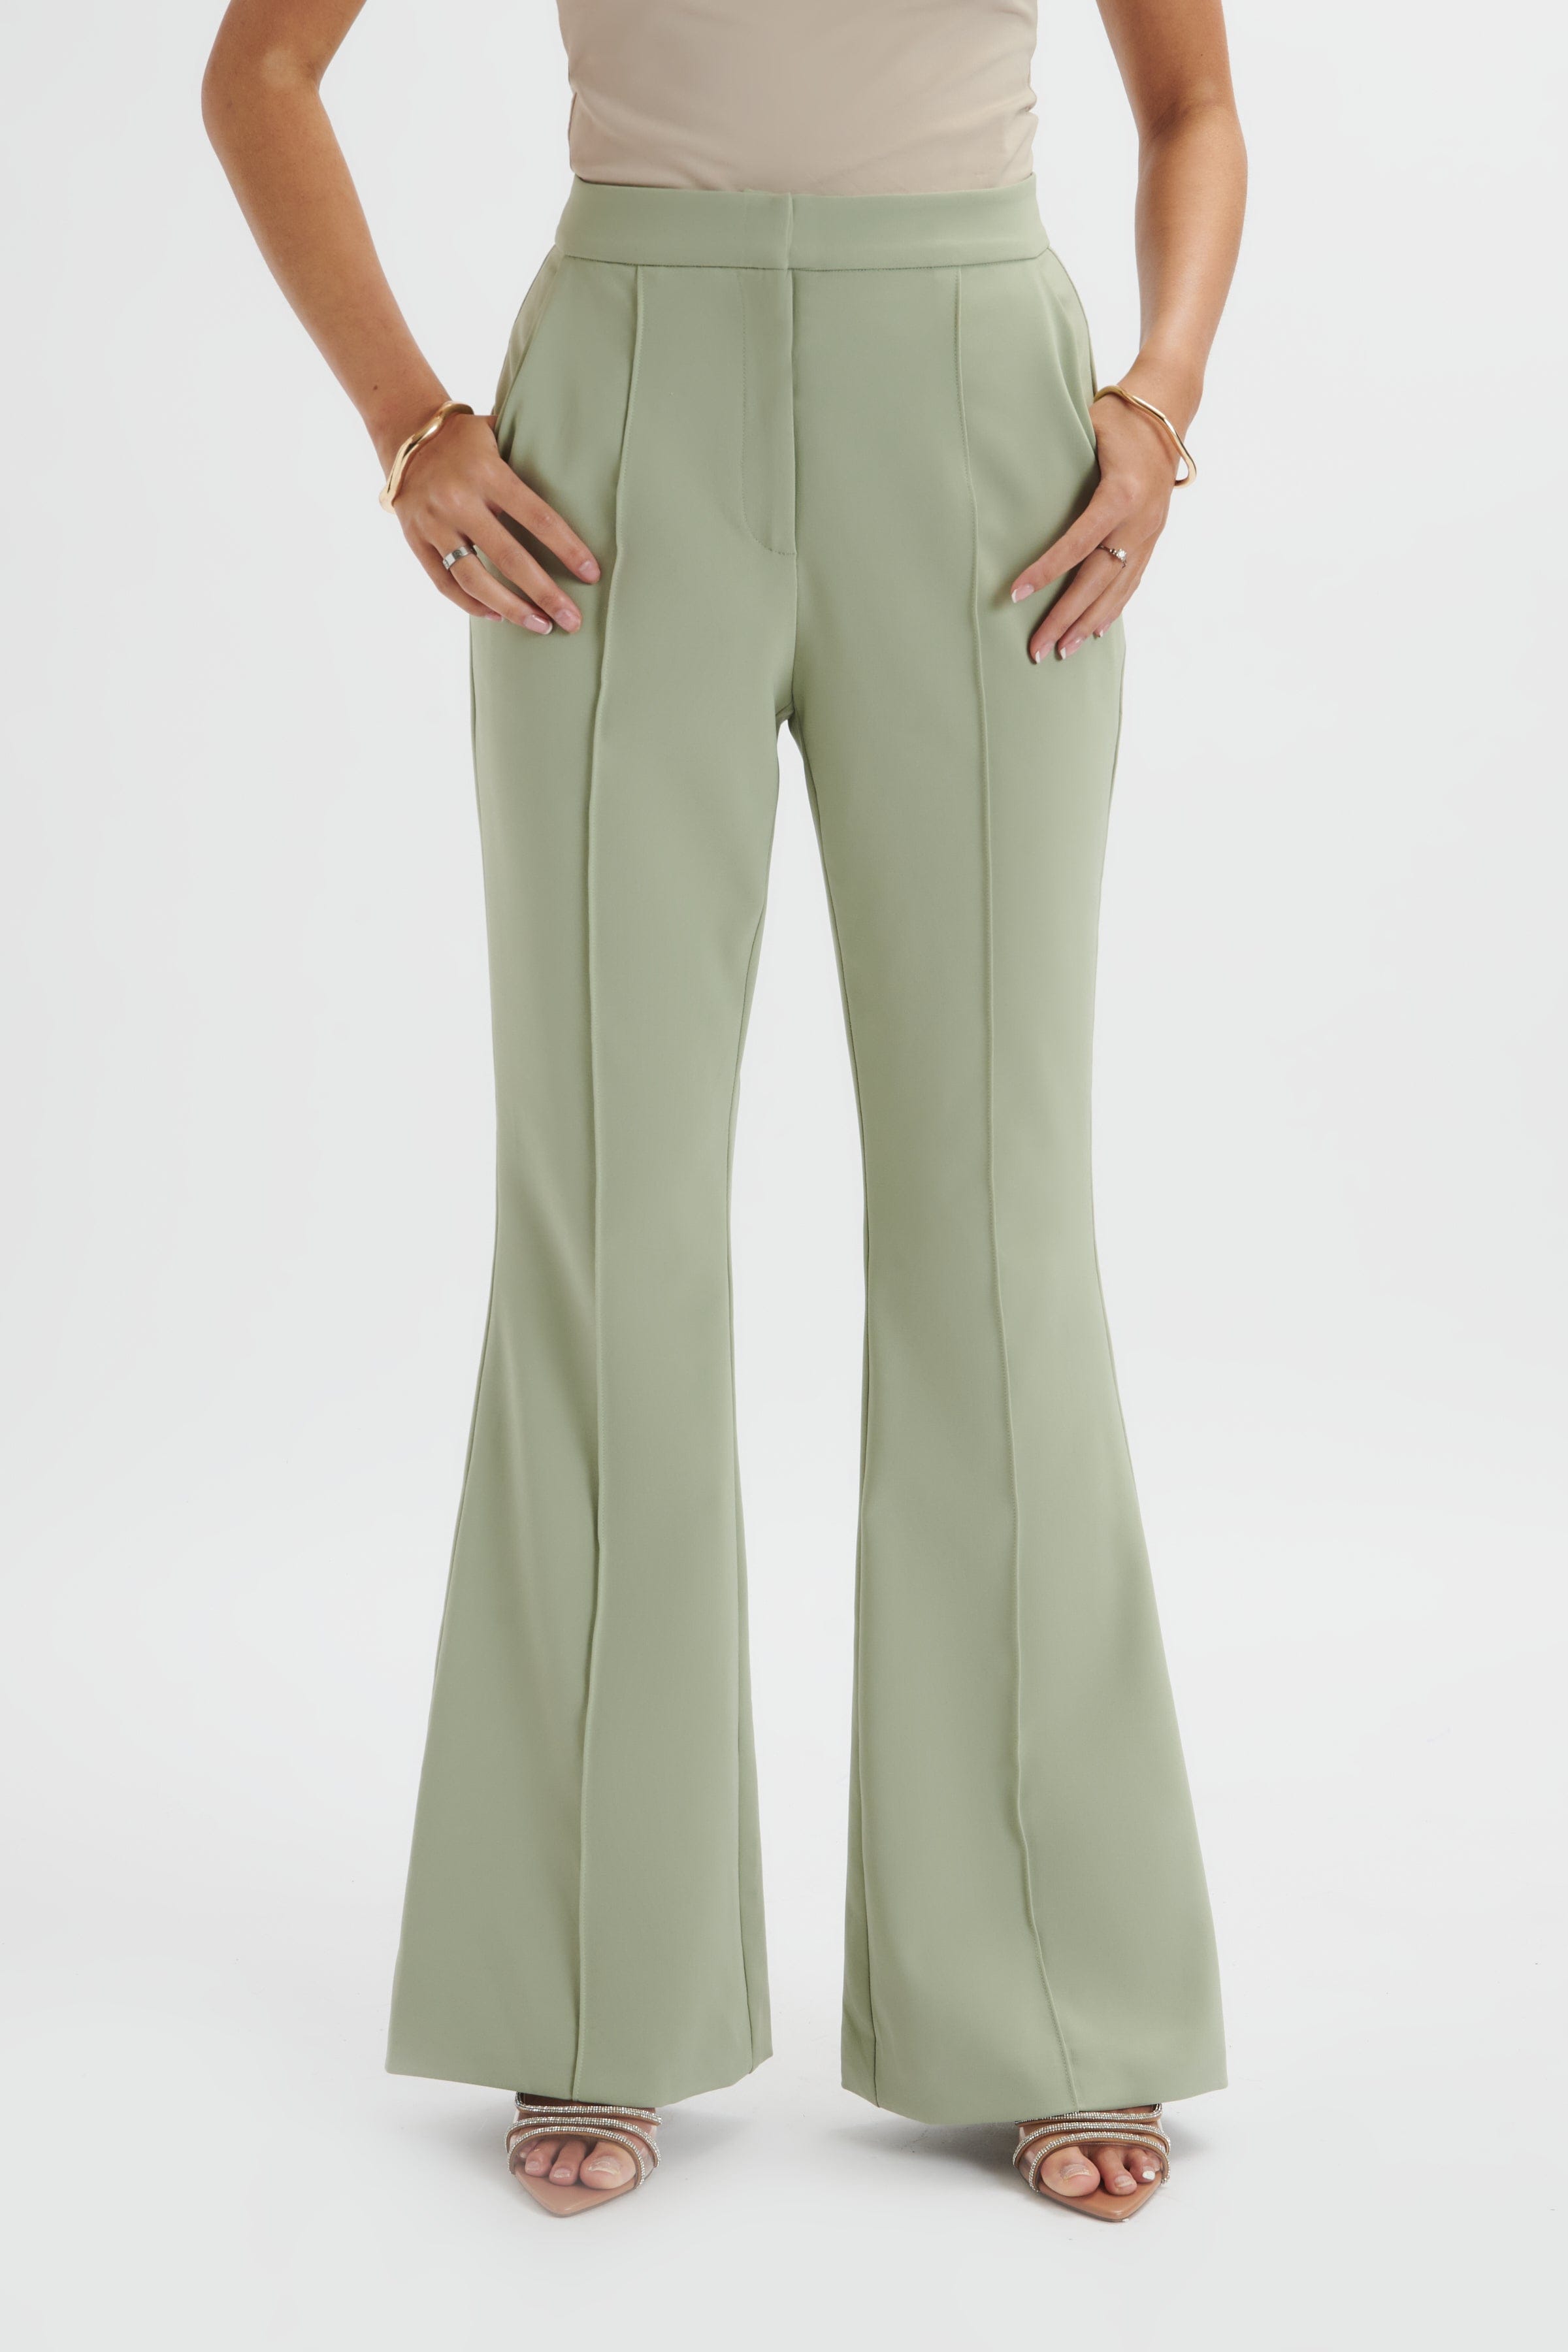 High-Waisted Flare Pants in Olive - Get great deals at JustFab